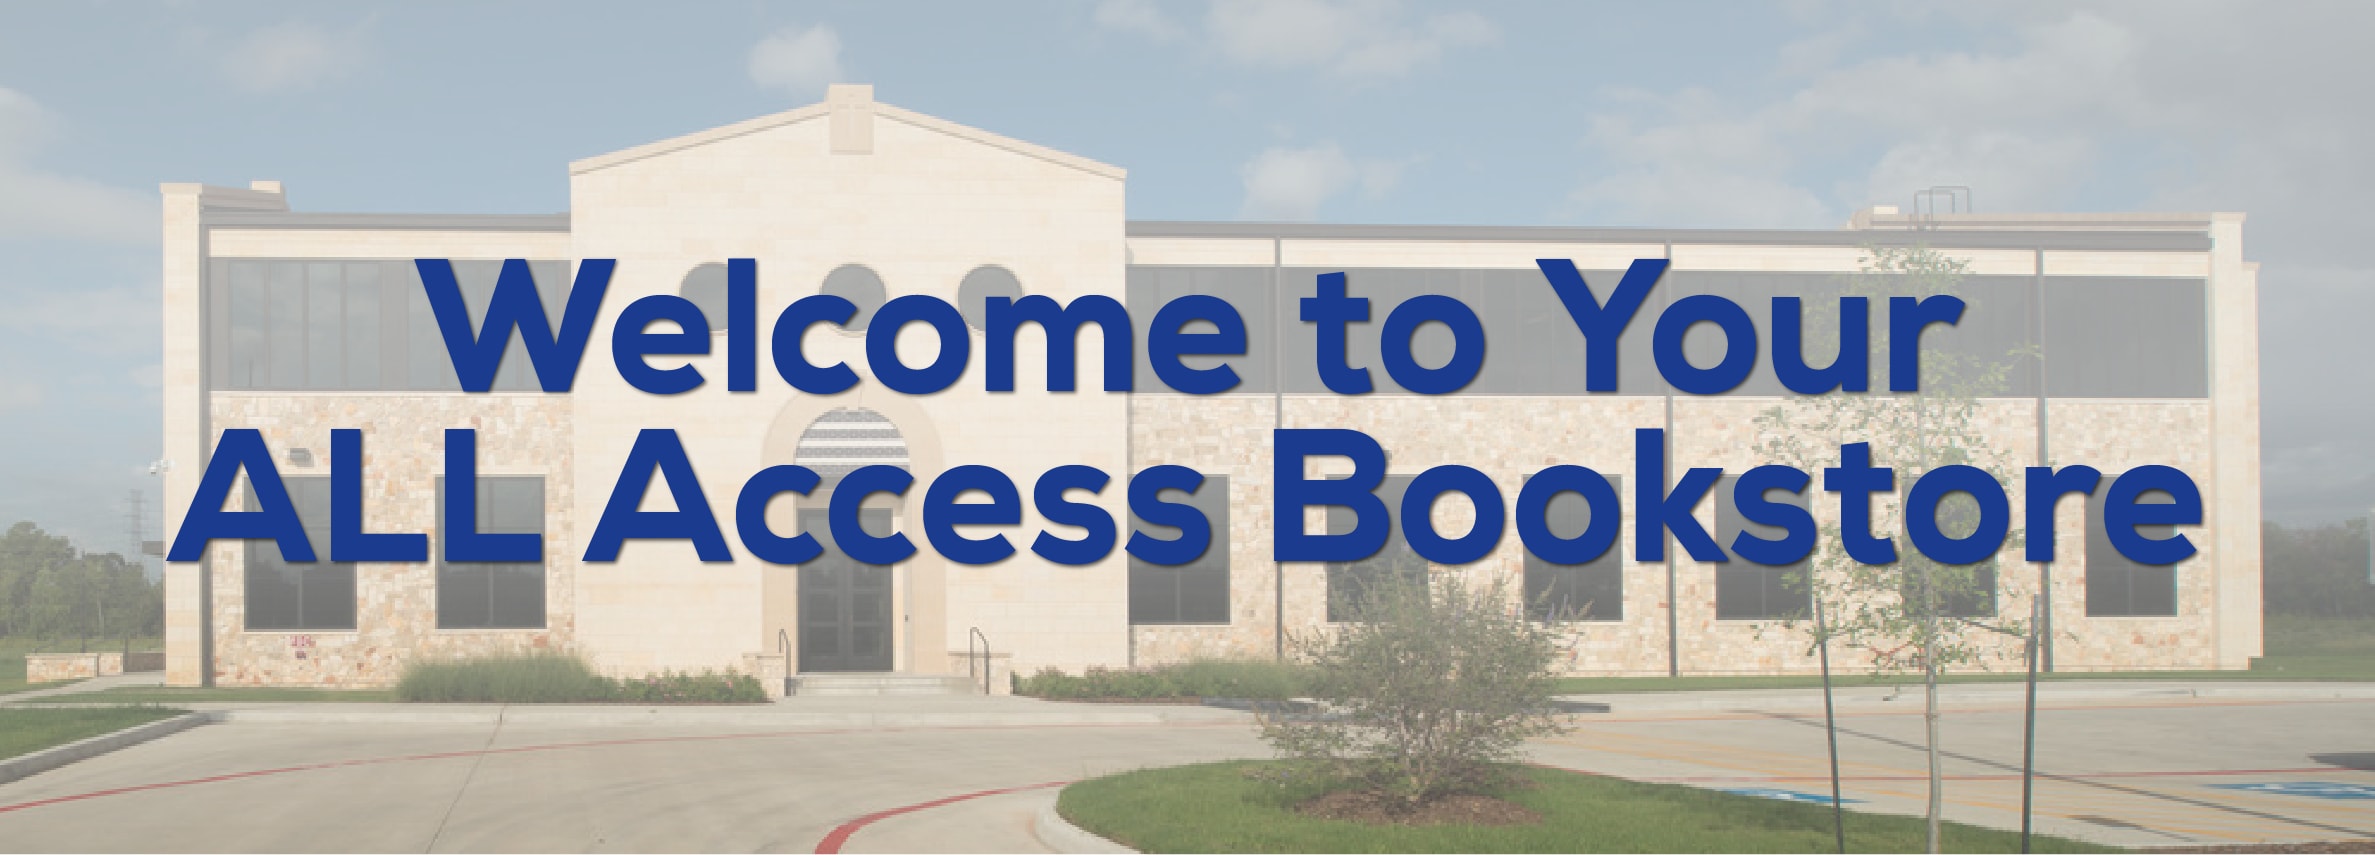 Welcome to Your ALL Access Bookstore! A convenient and affordable solution to textbooks